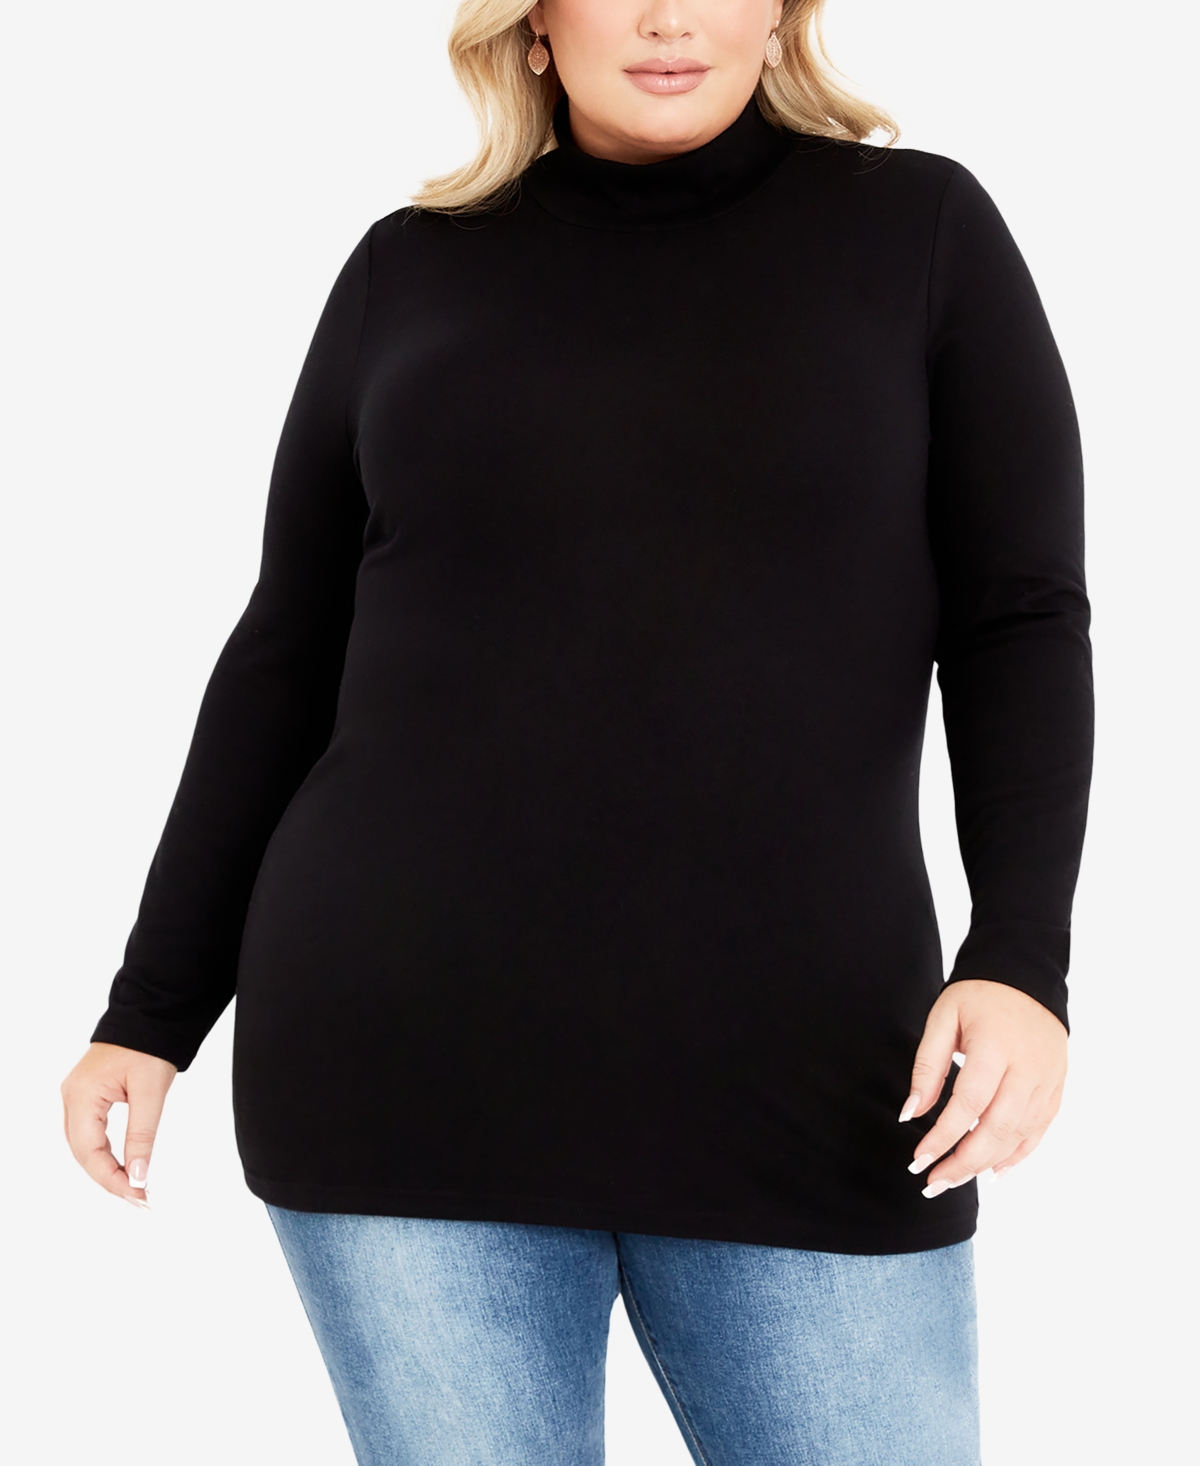 Plus Size Everly High Rolled Neck Tunic Top - Black